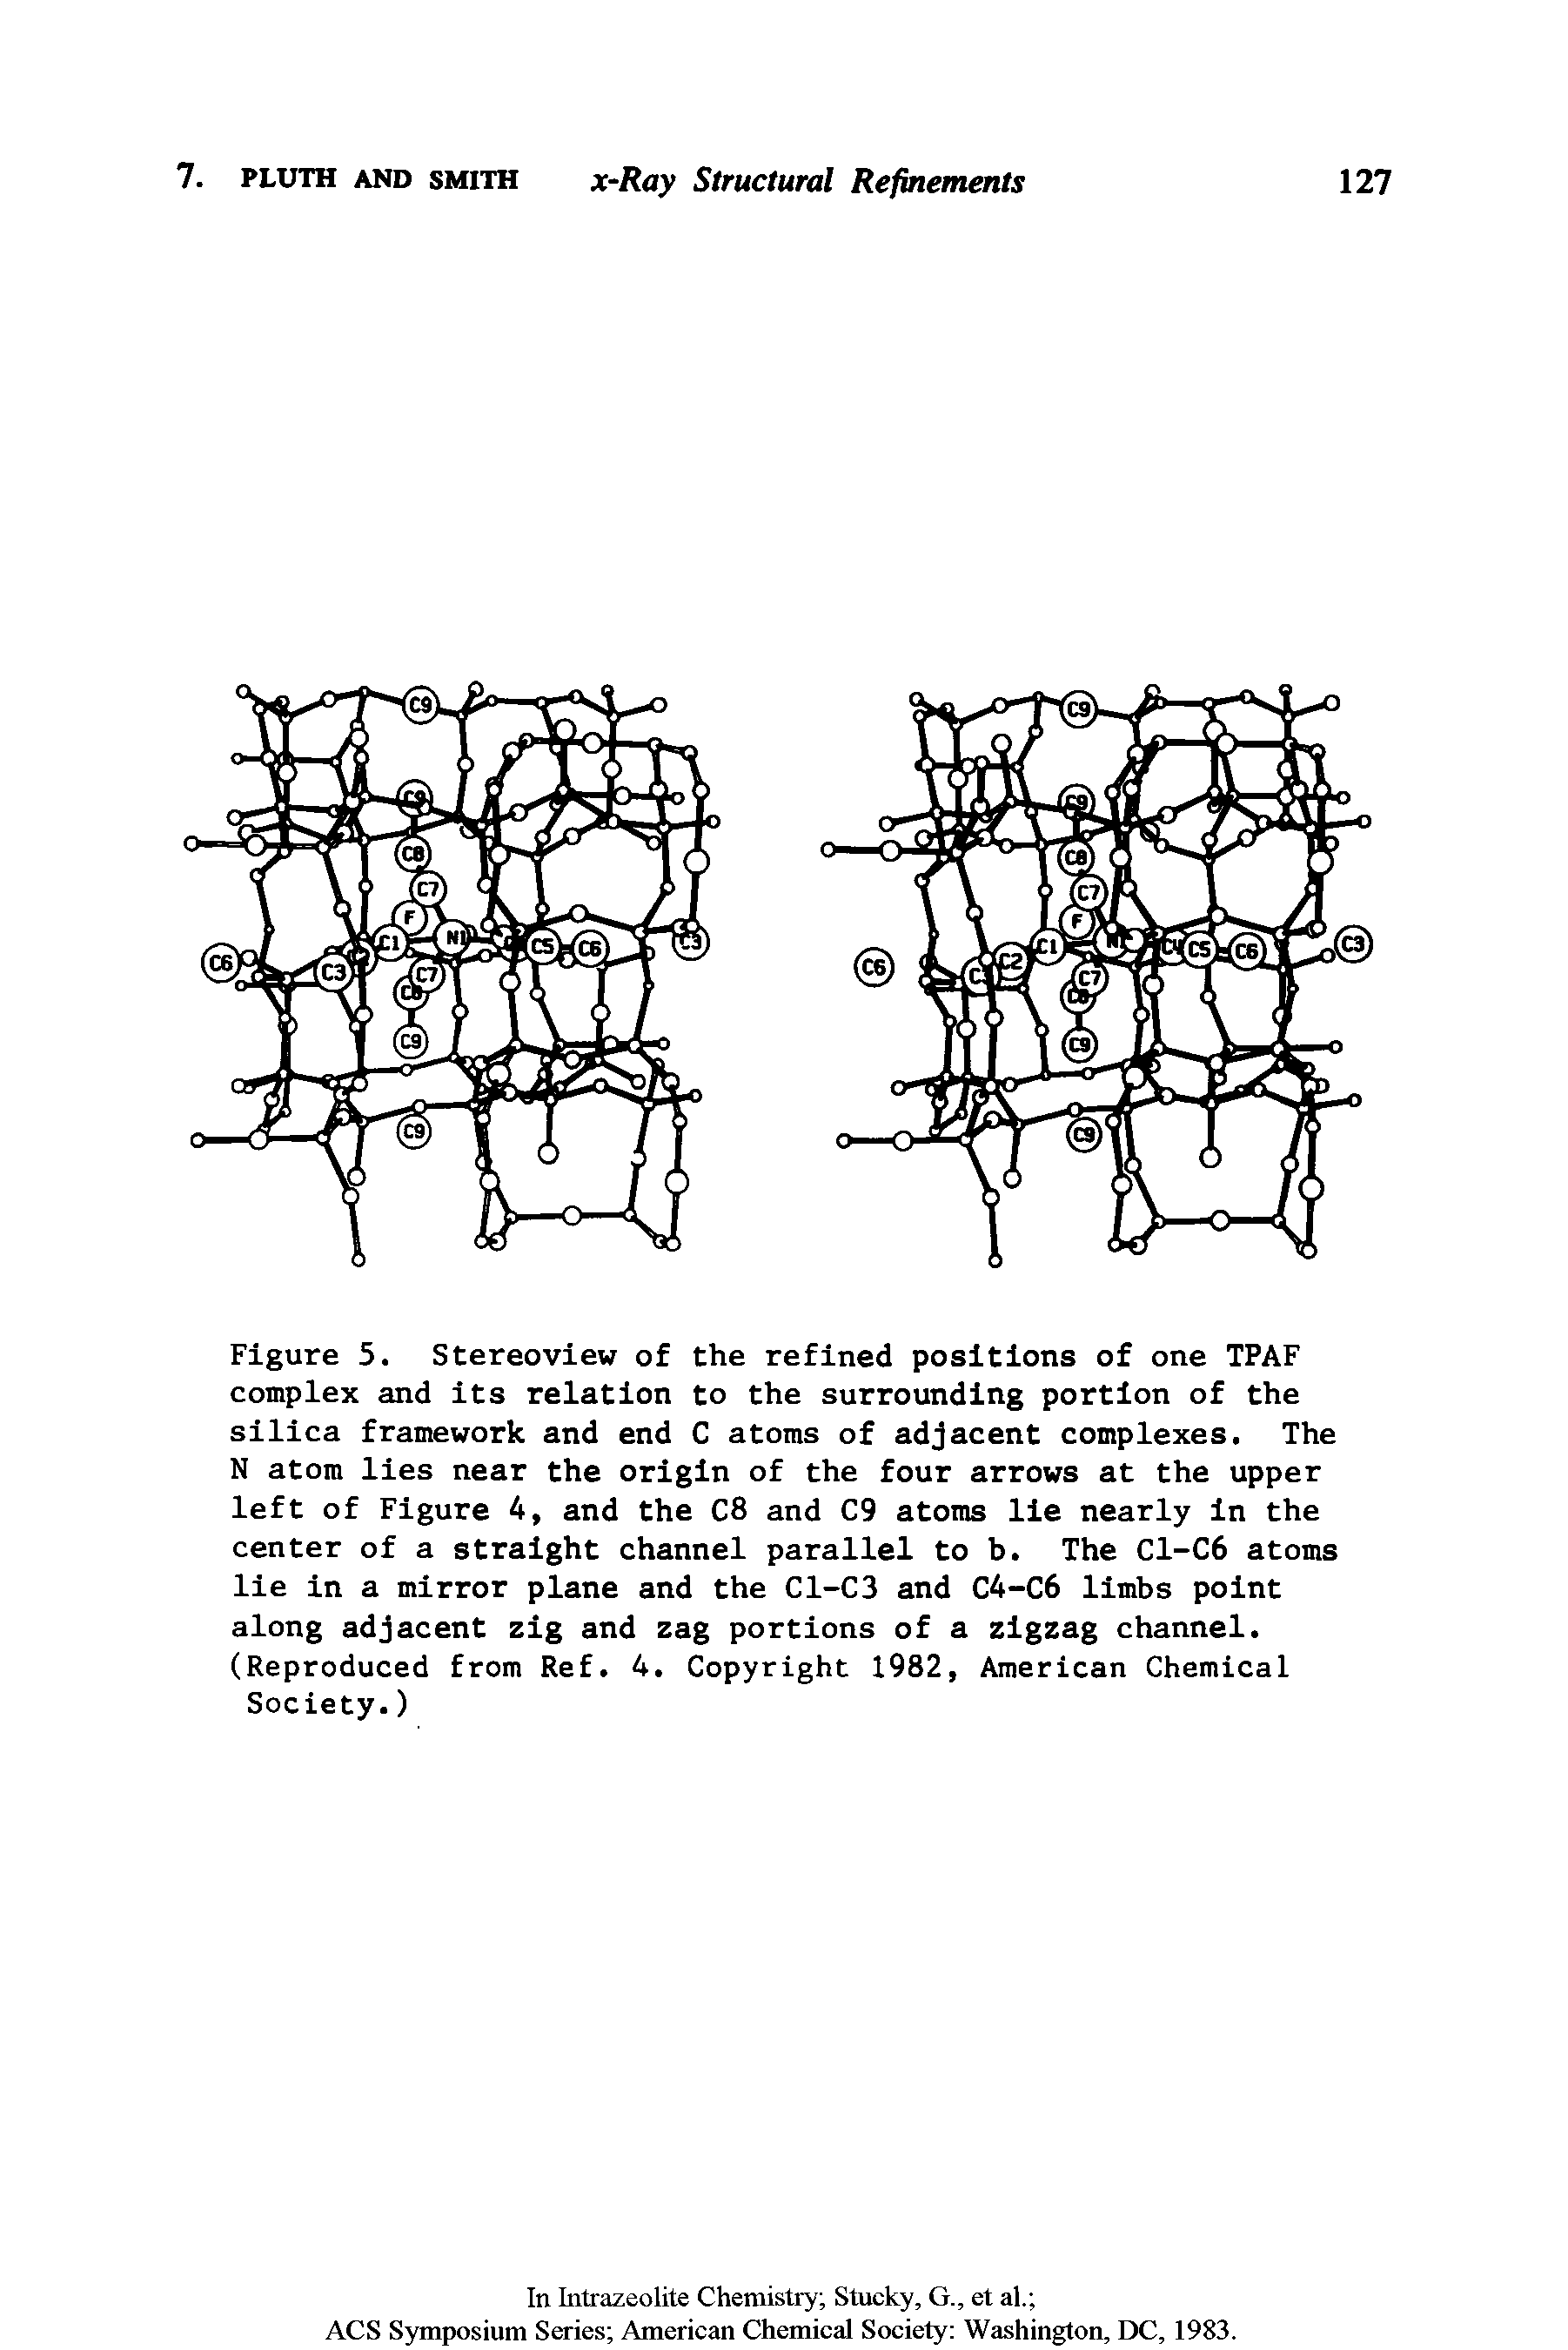 Figure 5. Stereoview of the refined positions of one TPAF complex and Its relation to the surrounding portion of the silica framework and end C atoms of adjacent complexes. The N atom lies near the origin of the four arrows at the upper left of Figure 4, and the C8 and C9 atoms lie nearly in the center of a straight channel parallel to b. The C1-C6 atoms lie in a mirror plane and the C1-C3 and C4-C6 limbs point along adjacent zig and zag portions of a zigzag channel. (Reproduced from Ref. 4. Copyright 1982, American Chemical Society.)...